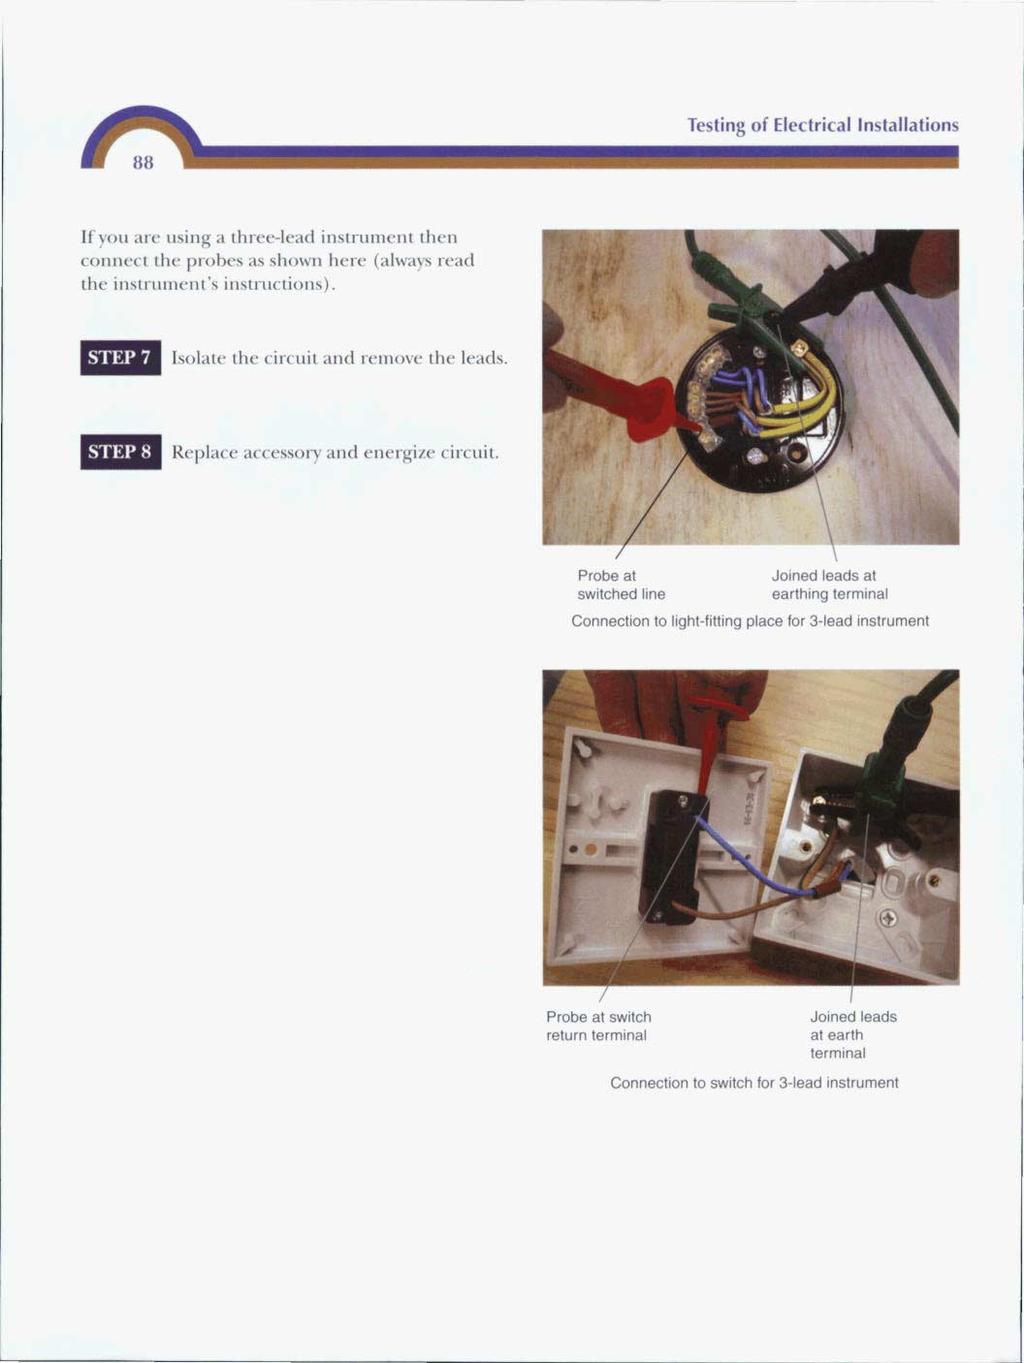 Testing of Electrical Installations If you are using a three-lead instrument then connect the probes as shown here (always read the instrument's instructions).